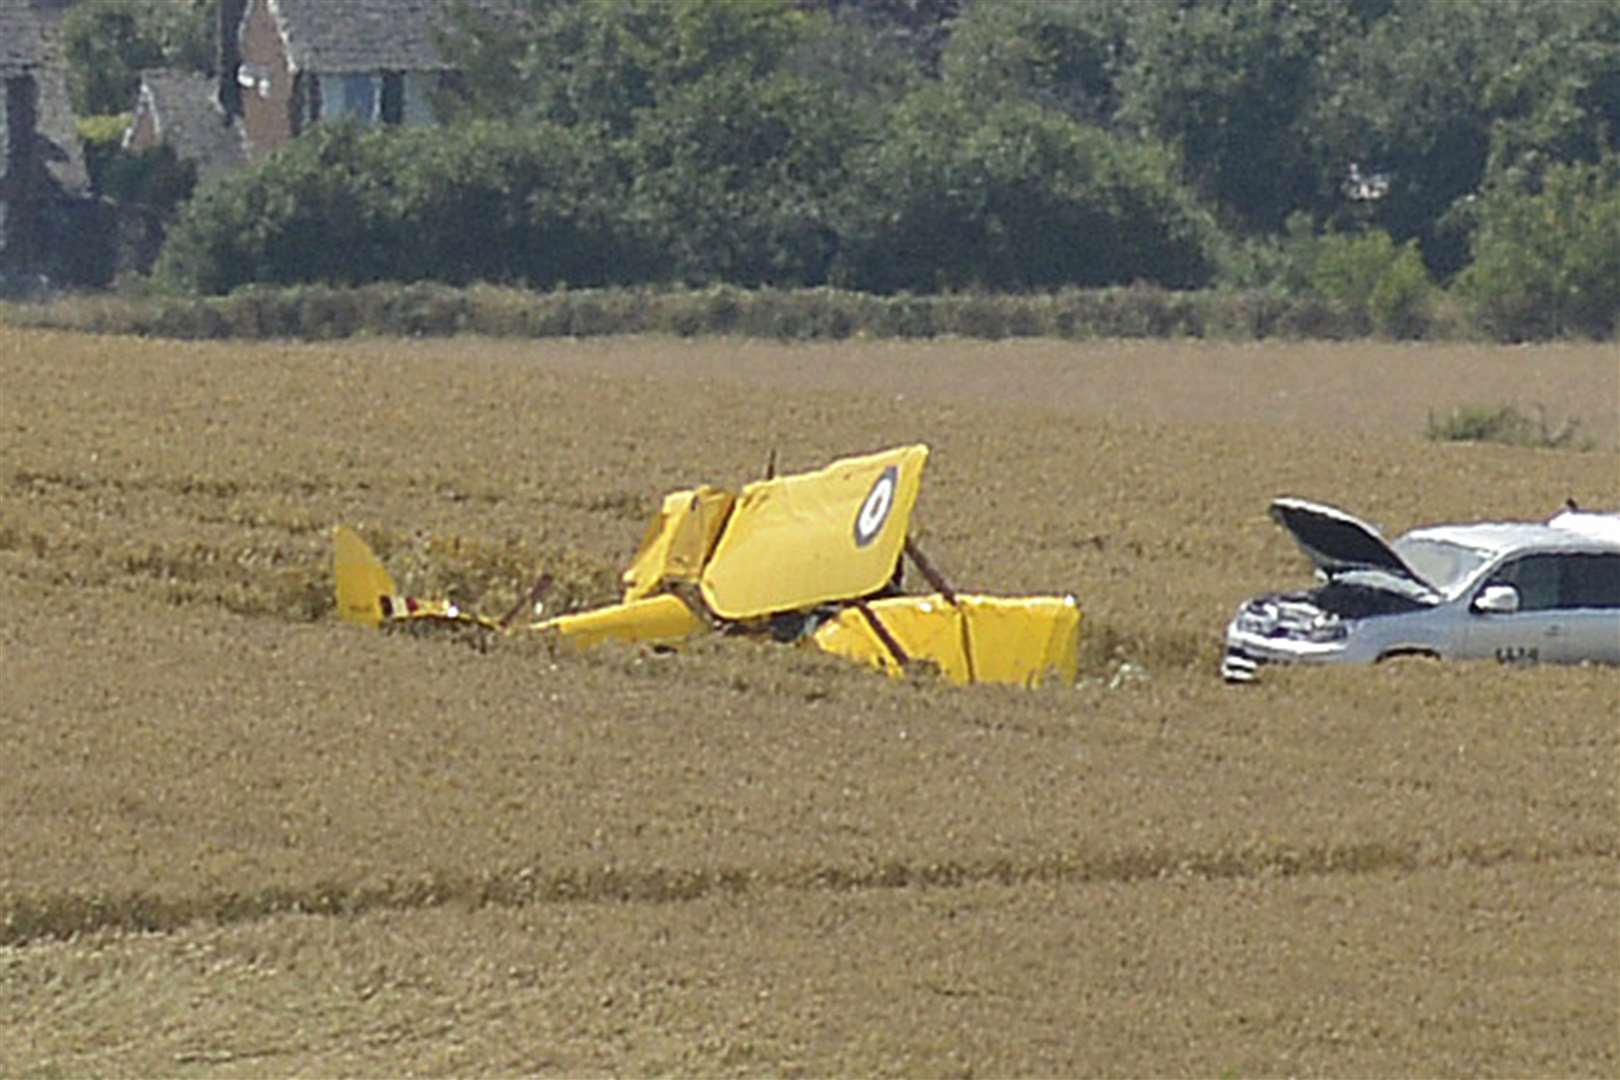 The plane came down in Postling, near Hythe. Picture: Paul Amos